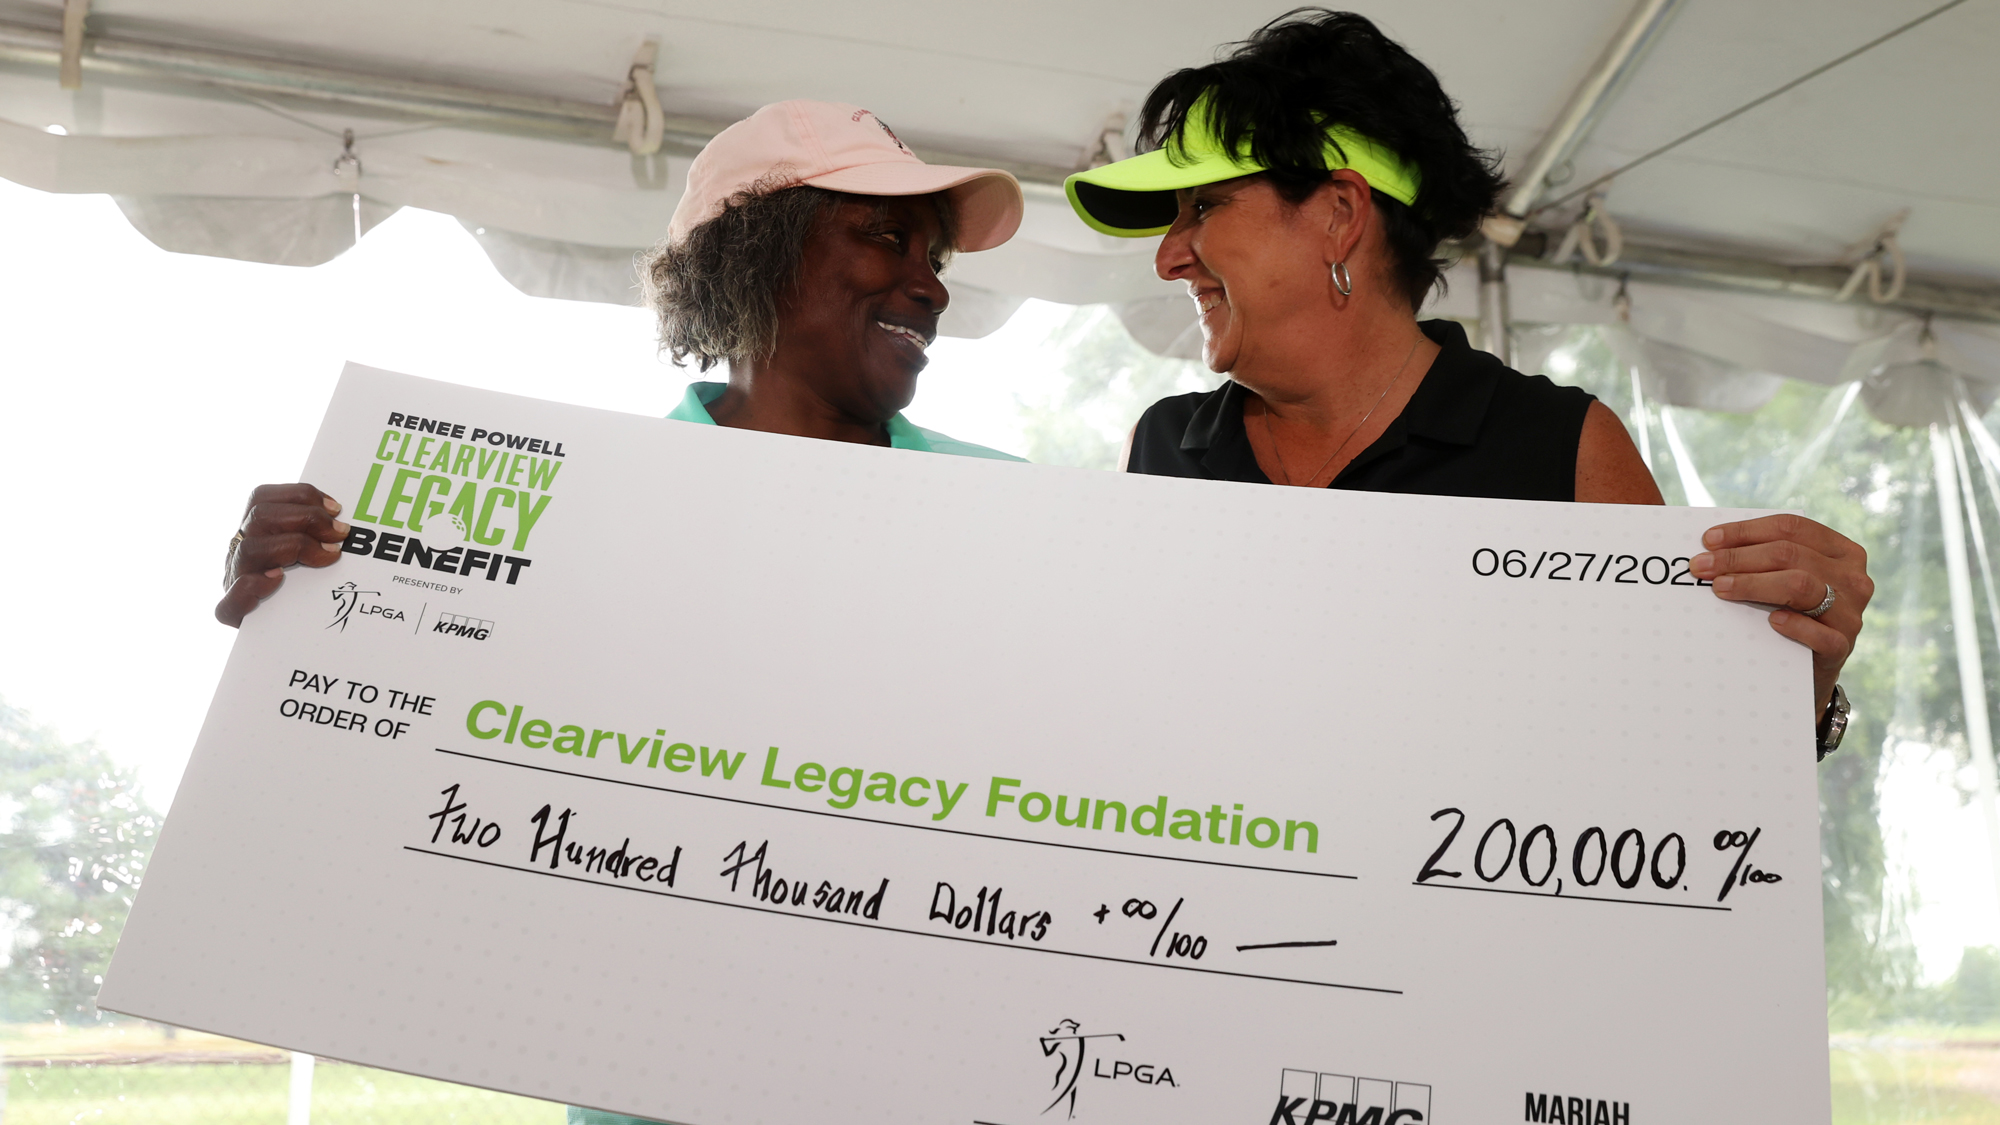 Renee Powell Clearview Legacy Benefit